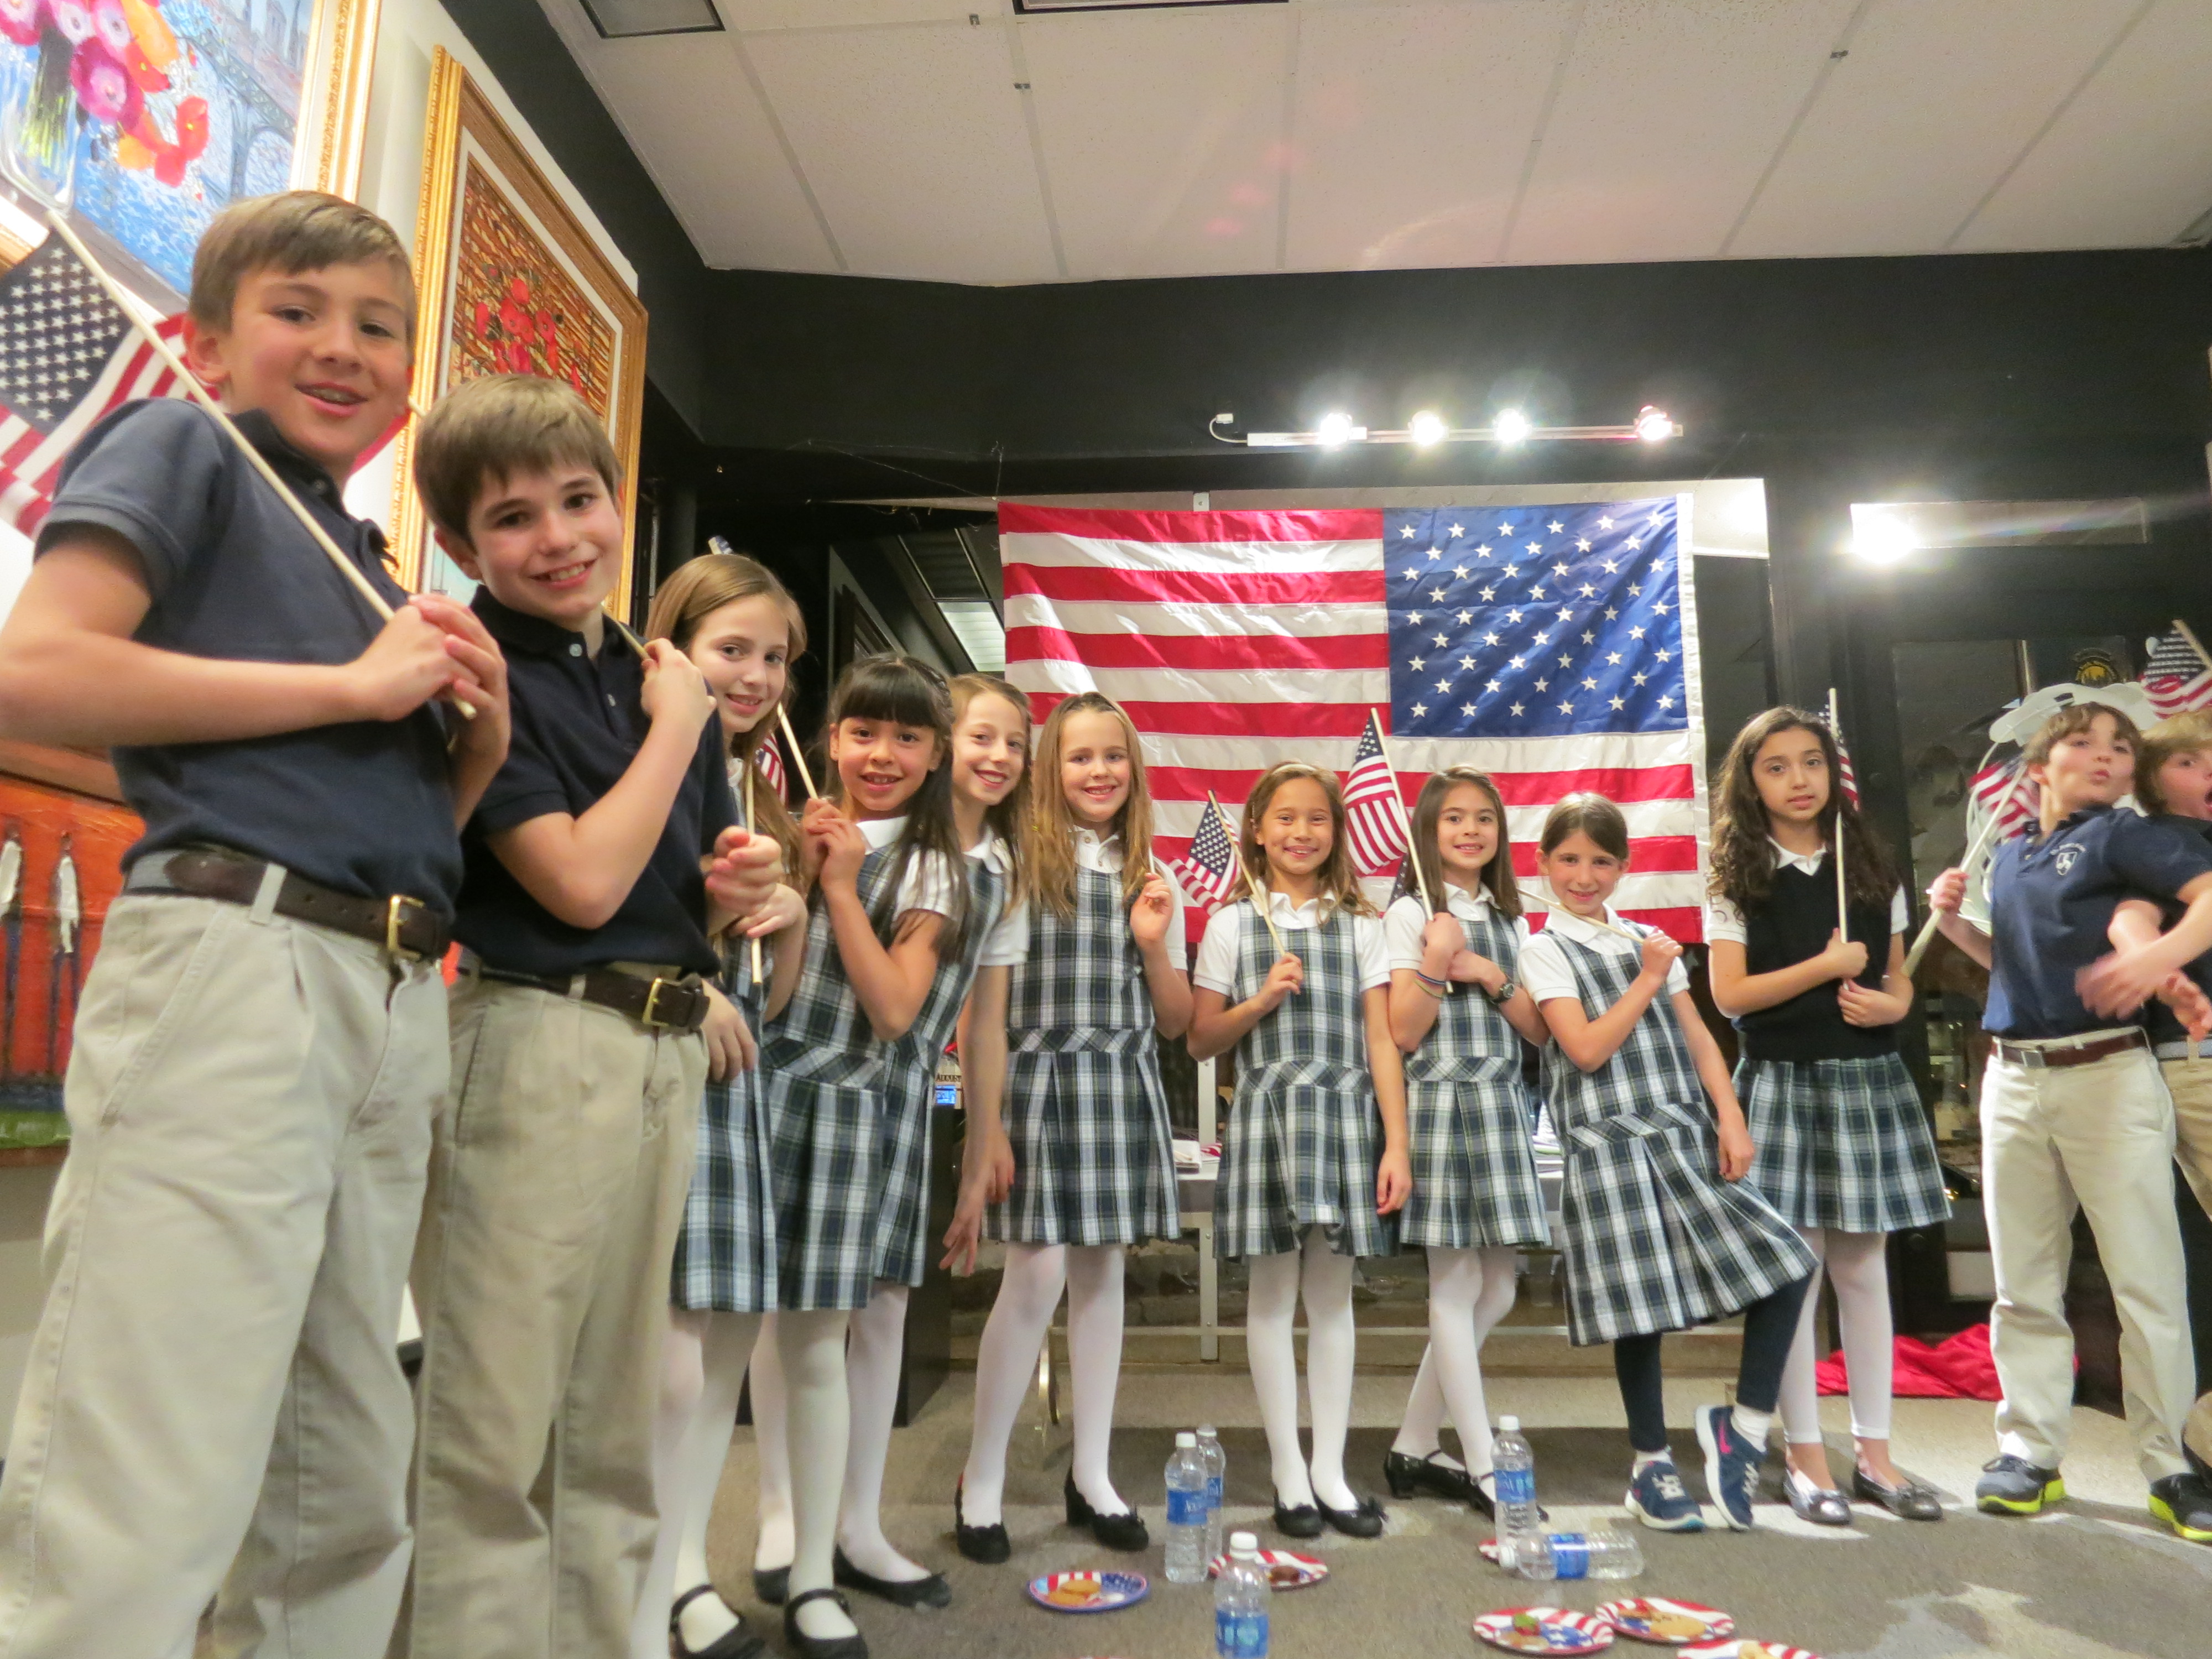 Stanwich School students at a fundraiser for the Business Development for Veterans (BDV) at C Parker Gallery in 2014. Photo: Leslie Yager